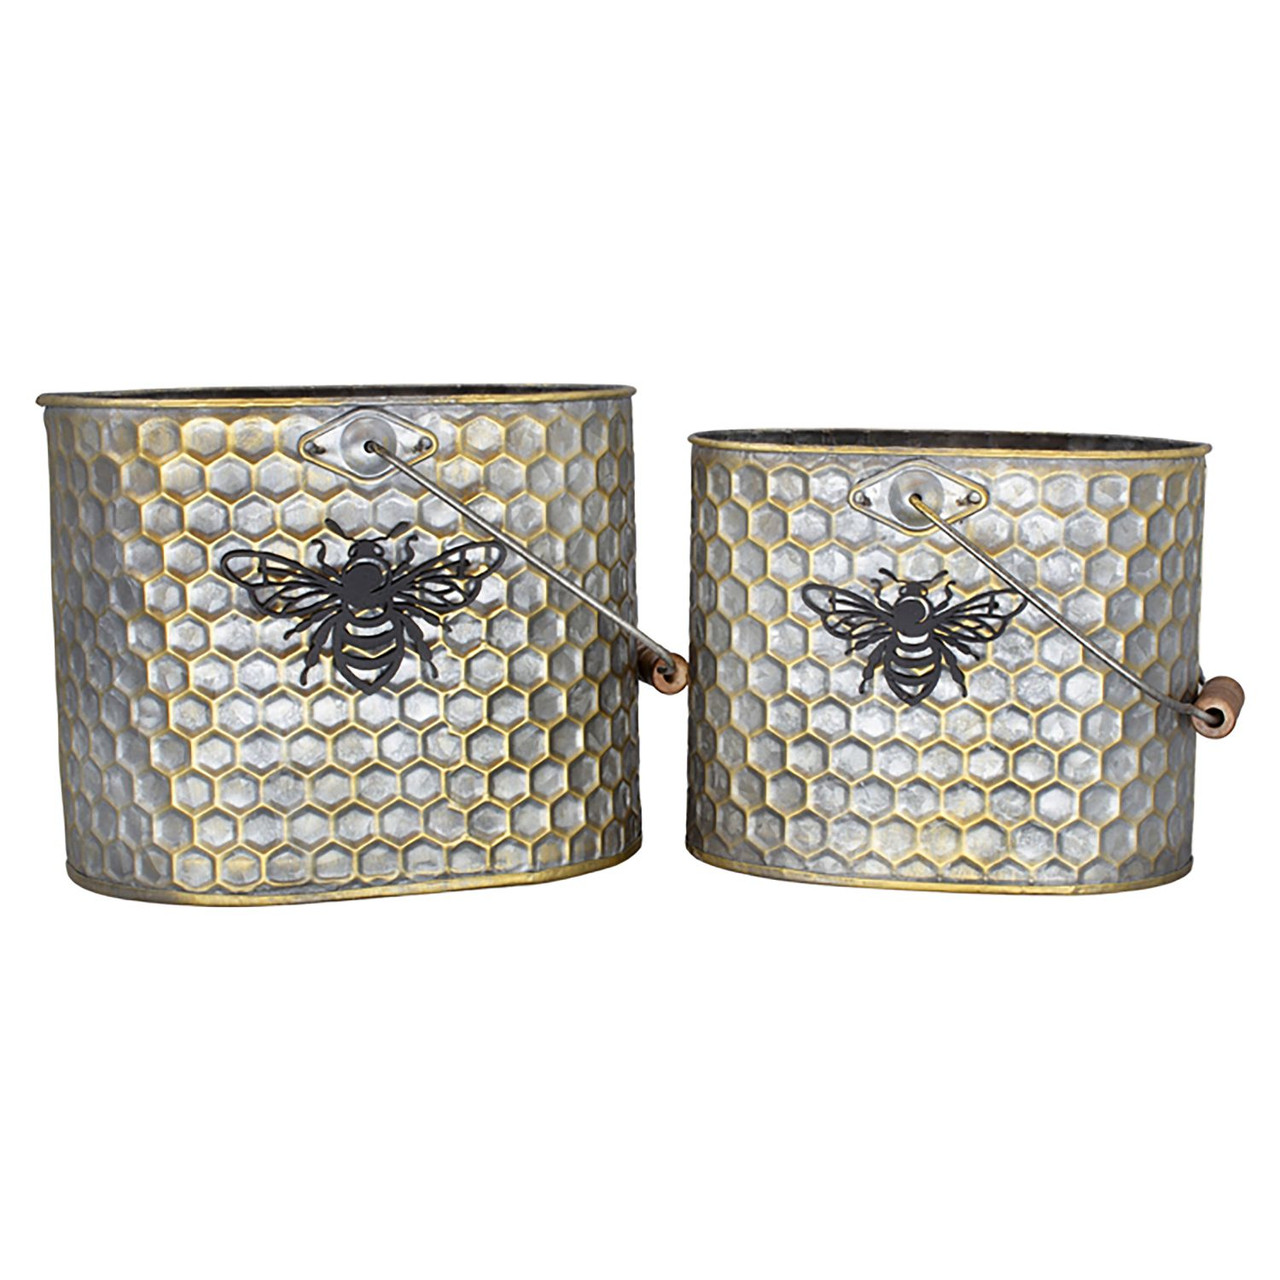 Set of 2 Silver & Gold Honeycomb Bee Buckets with Handles